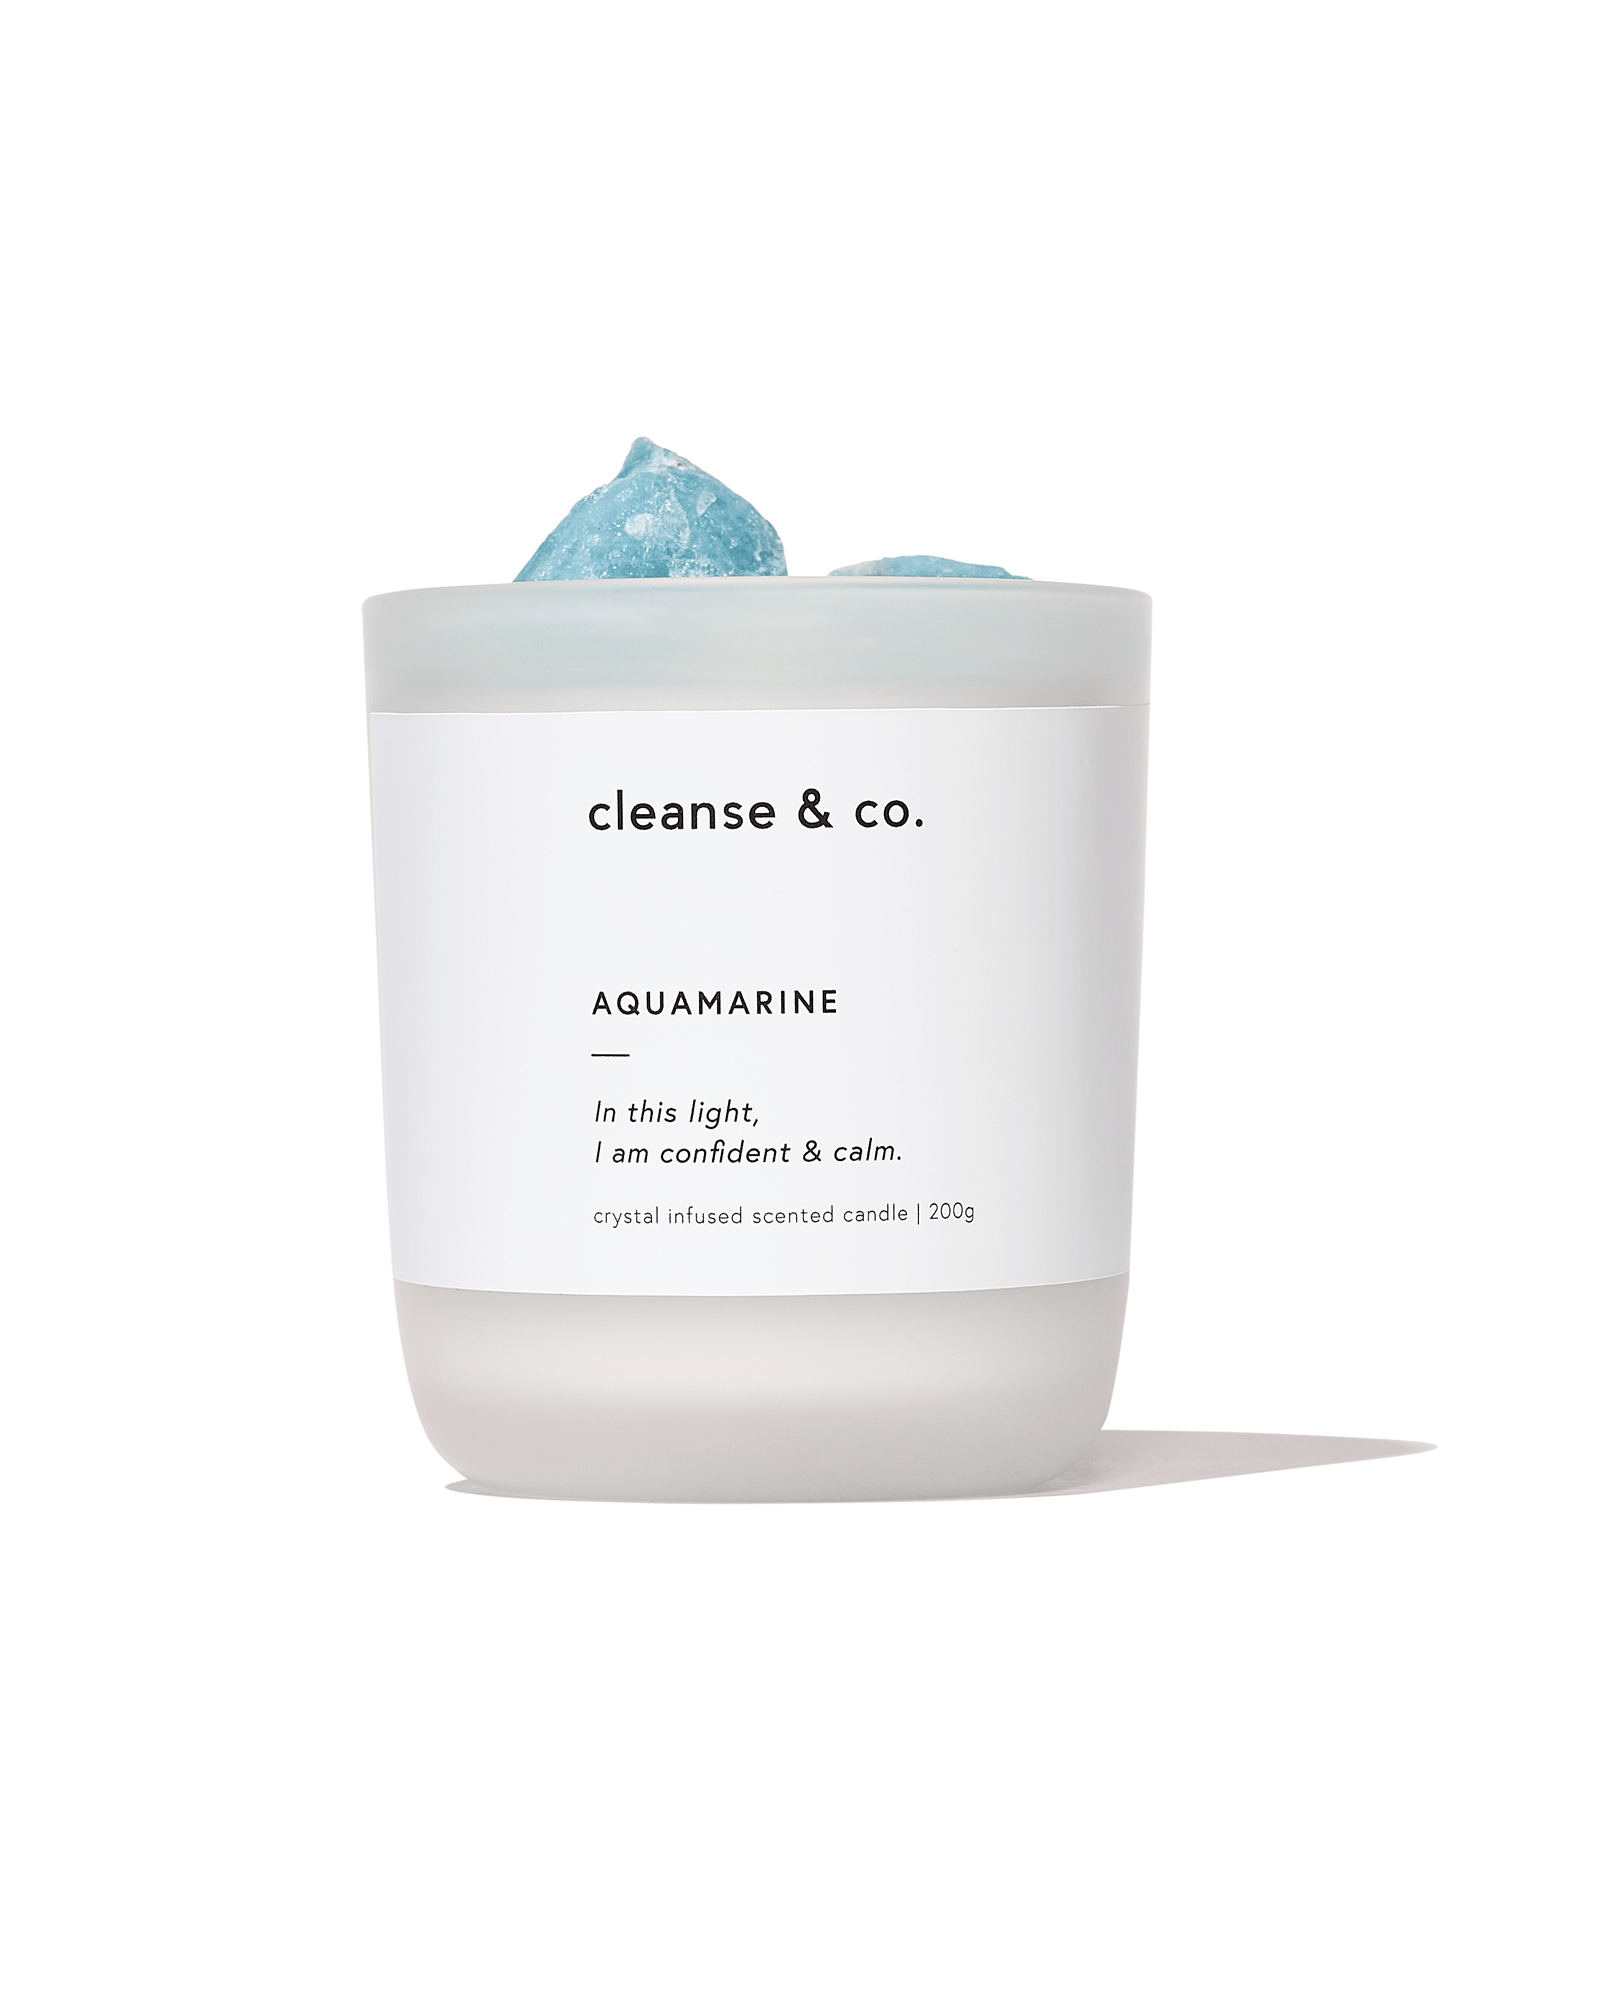 Aquamarine Intention Candle - confident & calm: 200G / Marine Moss & Melon by Cleanse & Co.